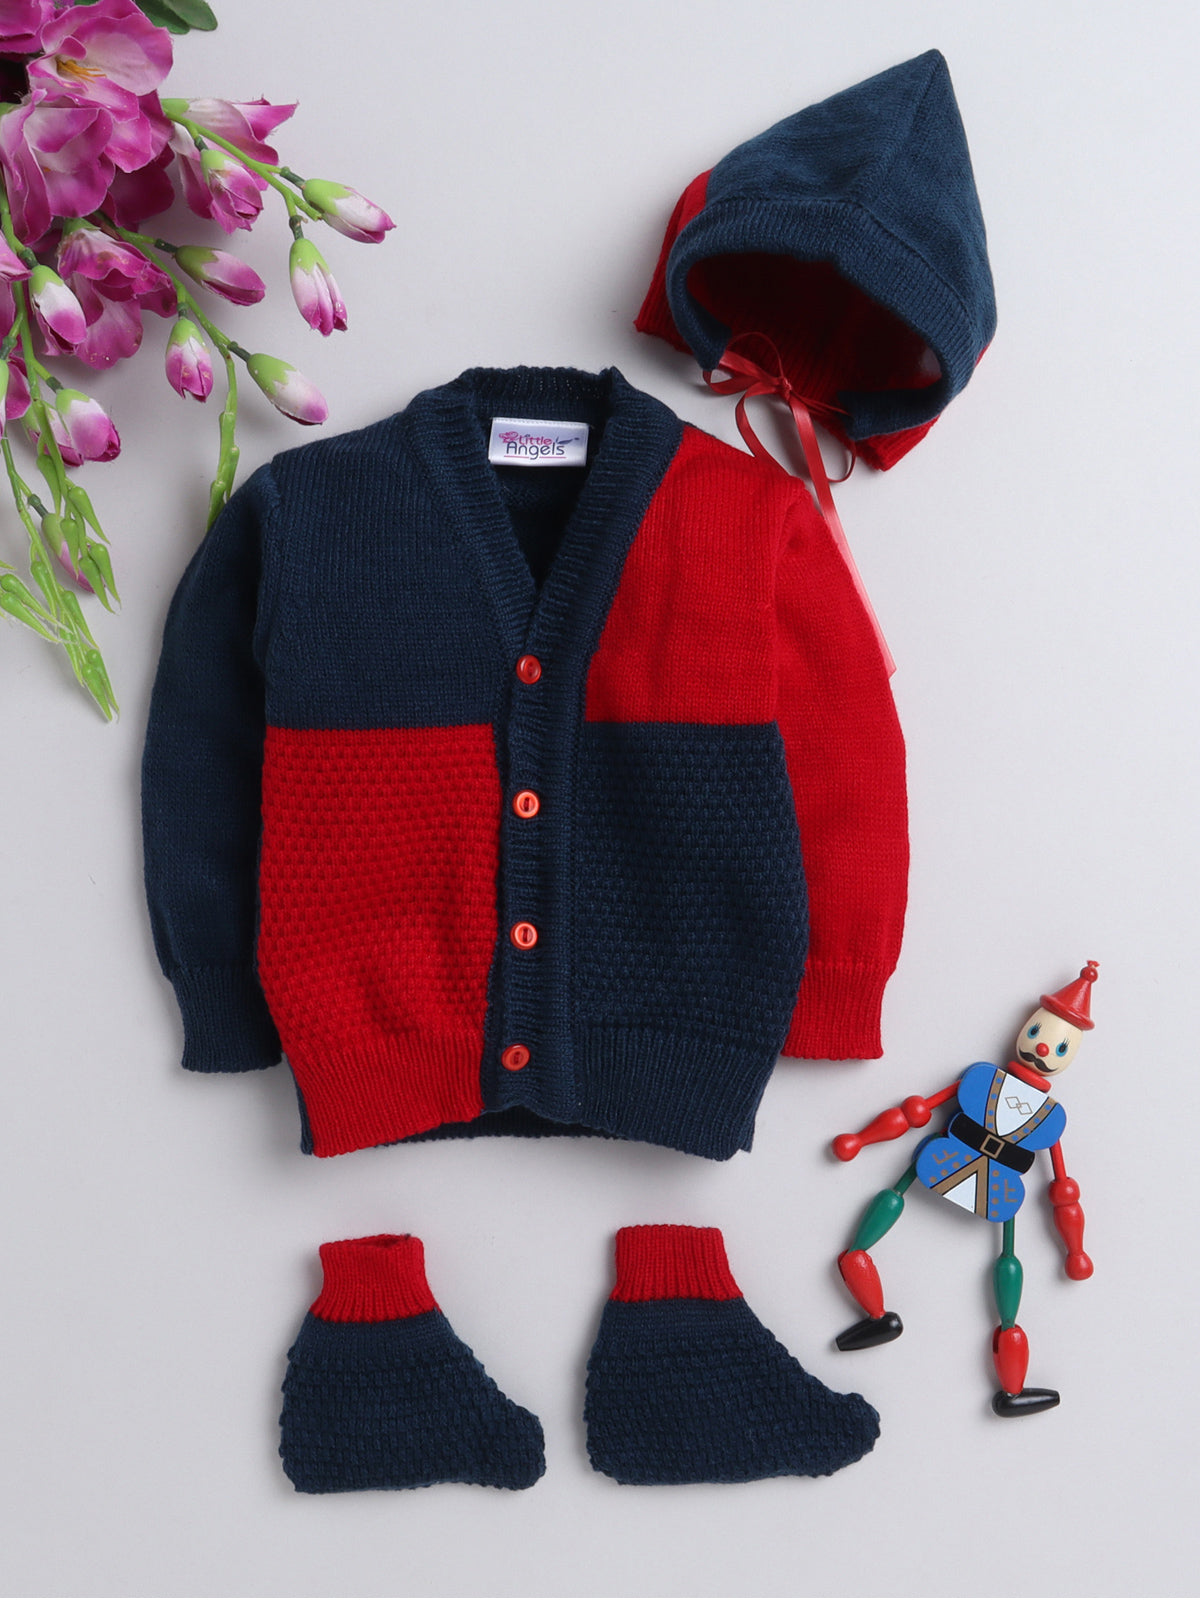 Full sleeves front open red and navy color sweater with matching cap and socks for baby